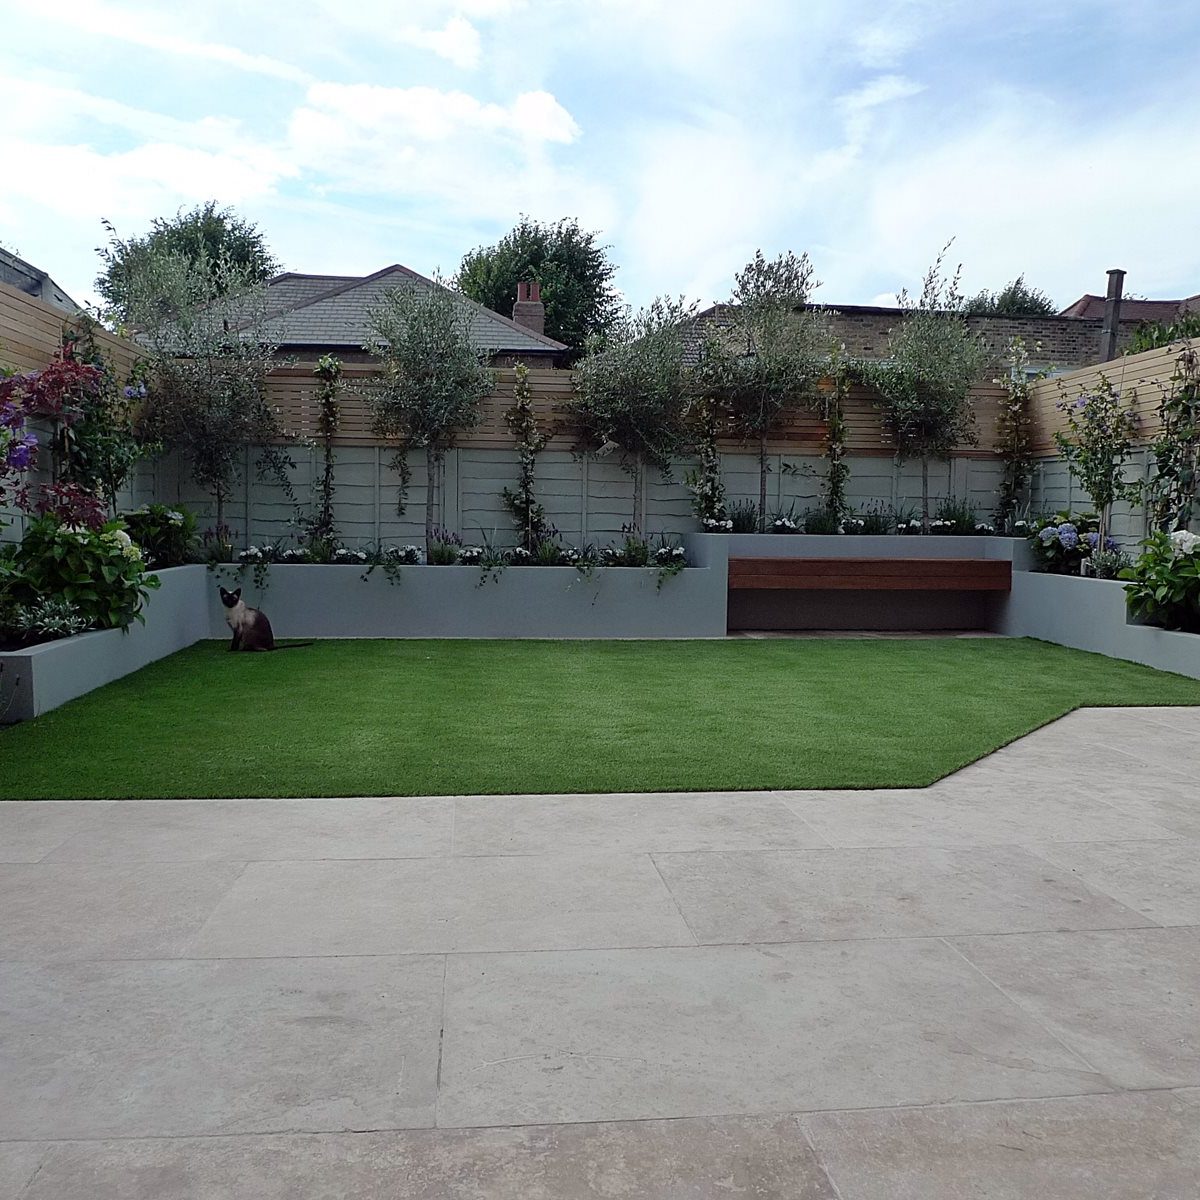 Back garden with light paving stones, artificial grass and a border of decorative plants